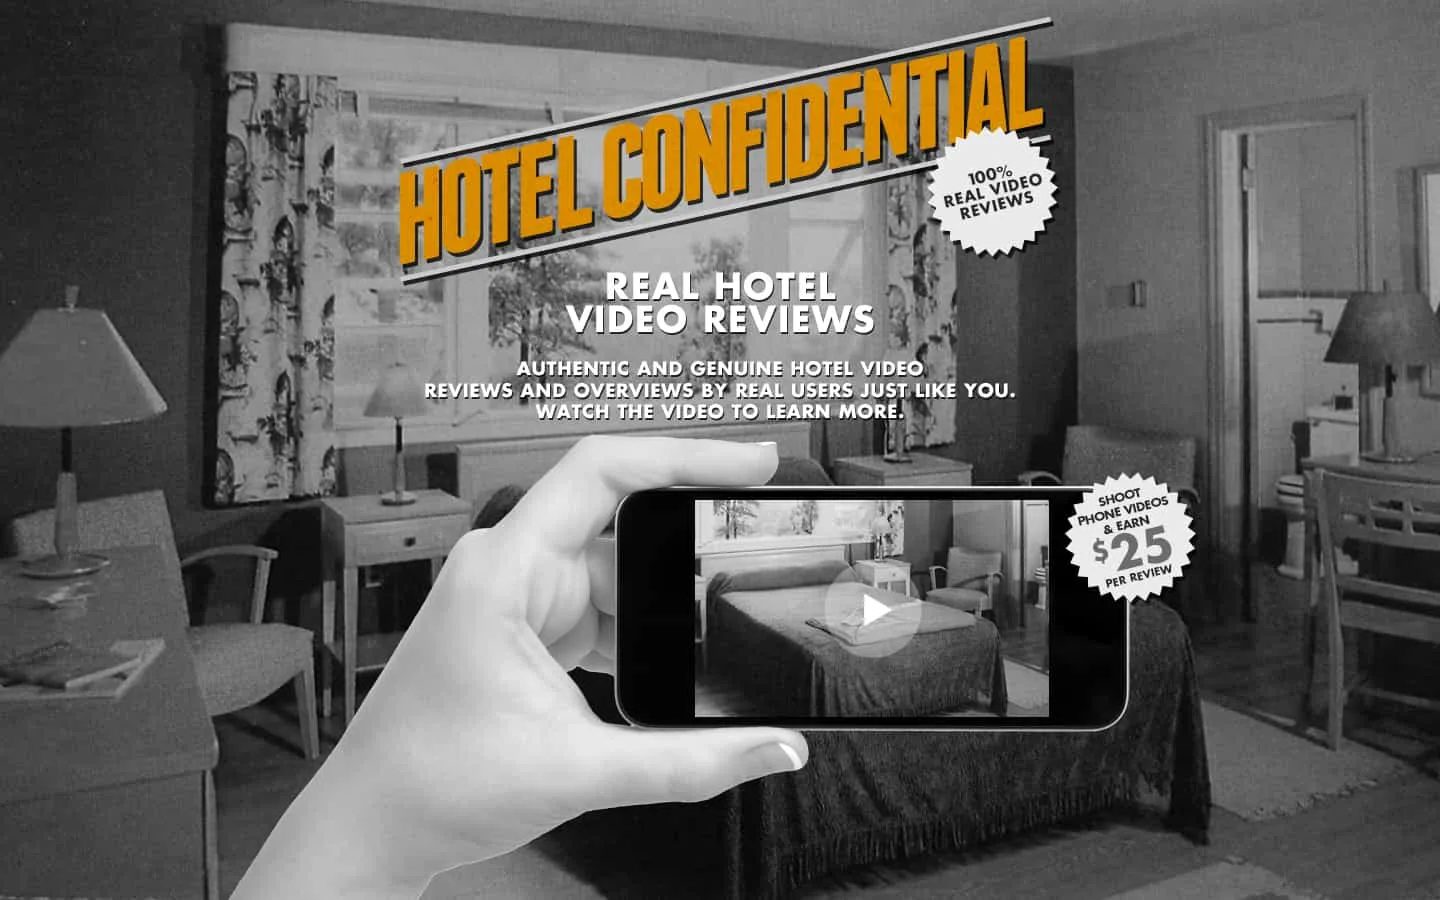 HotelConfidential, make $25 in 6 minutes